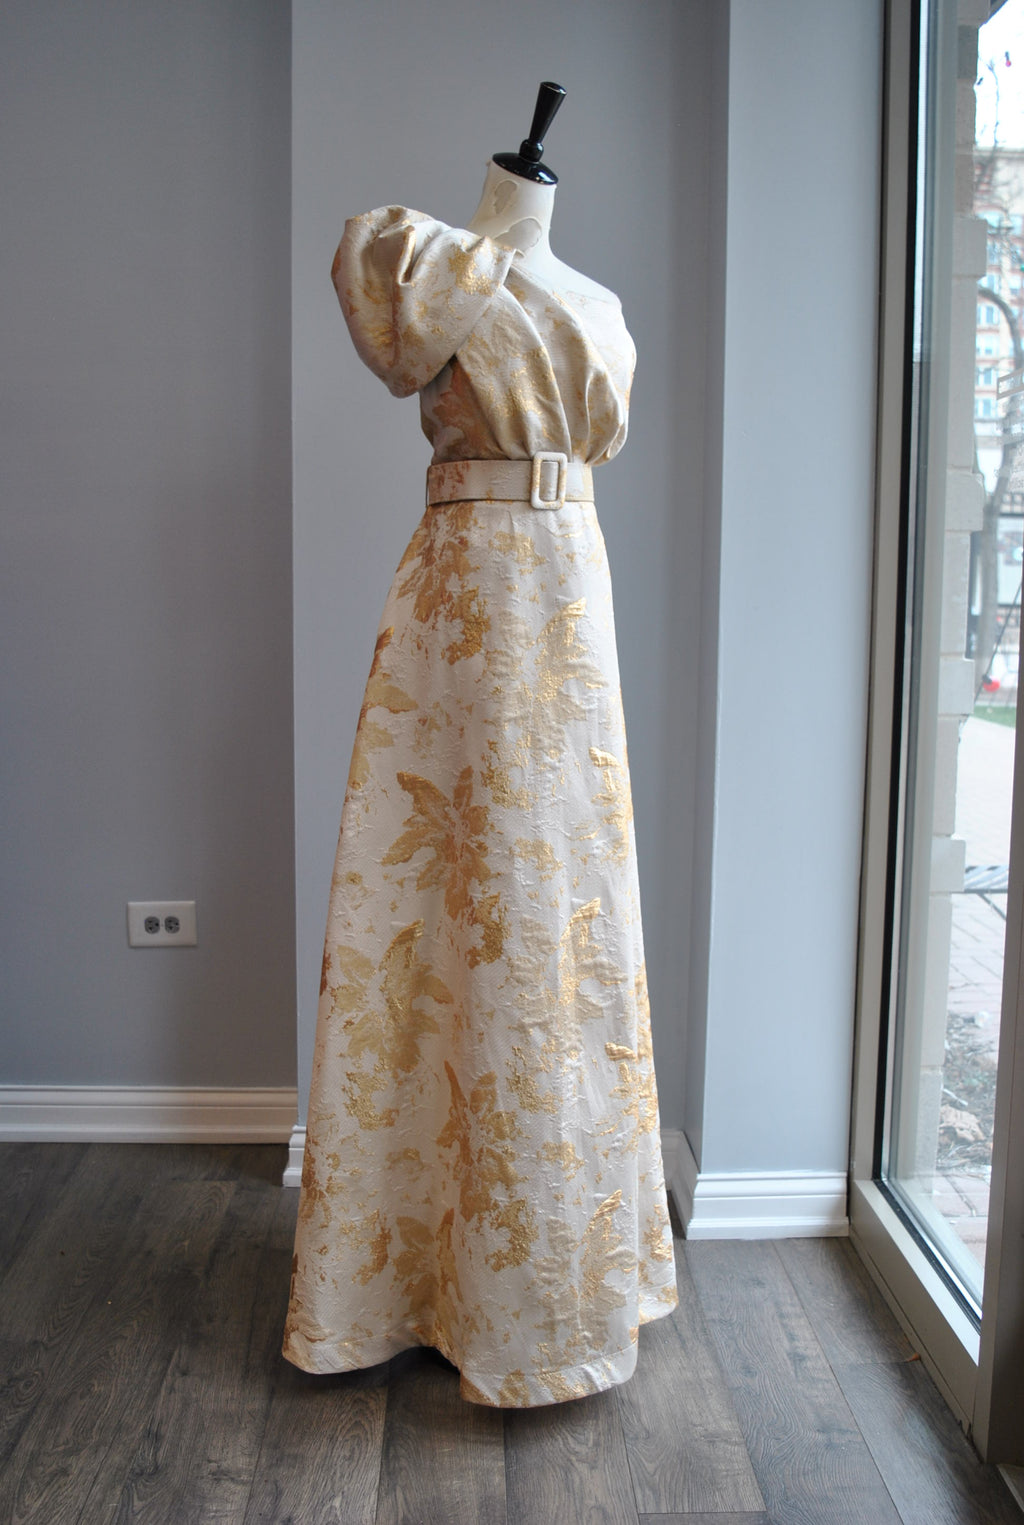 GOLD LONG ASYMMETRIC EVENING GOWN WITH SIDE POCKETS AND A BELT